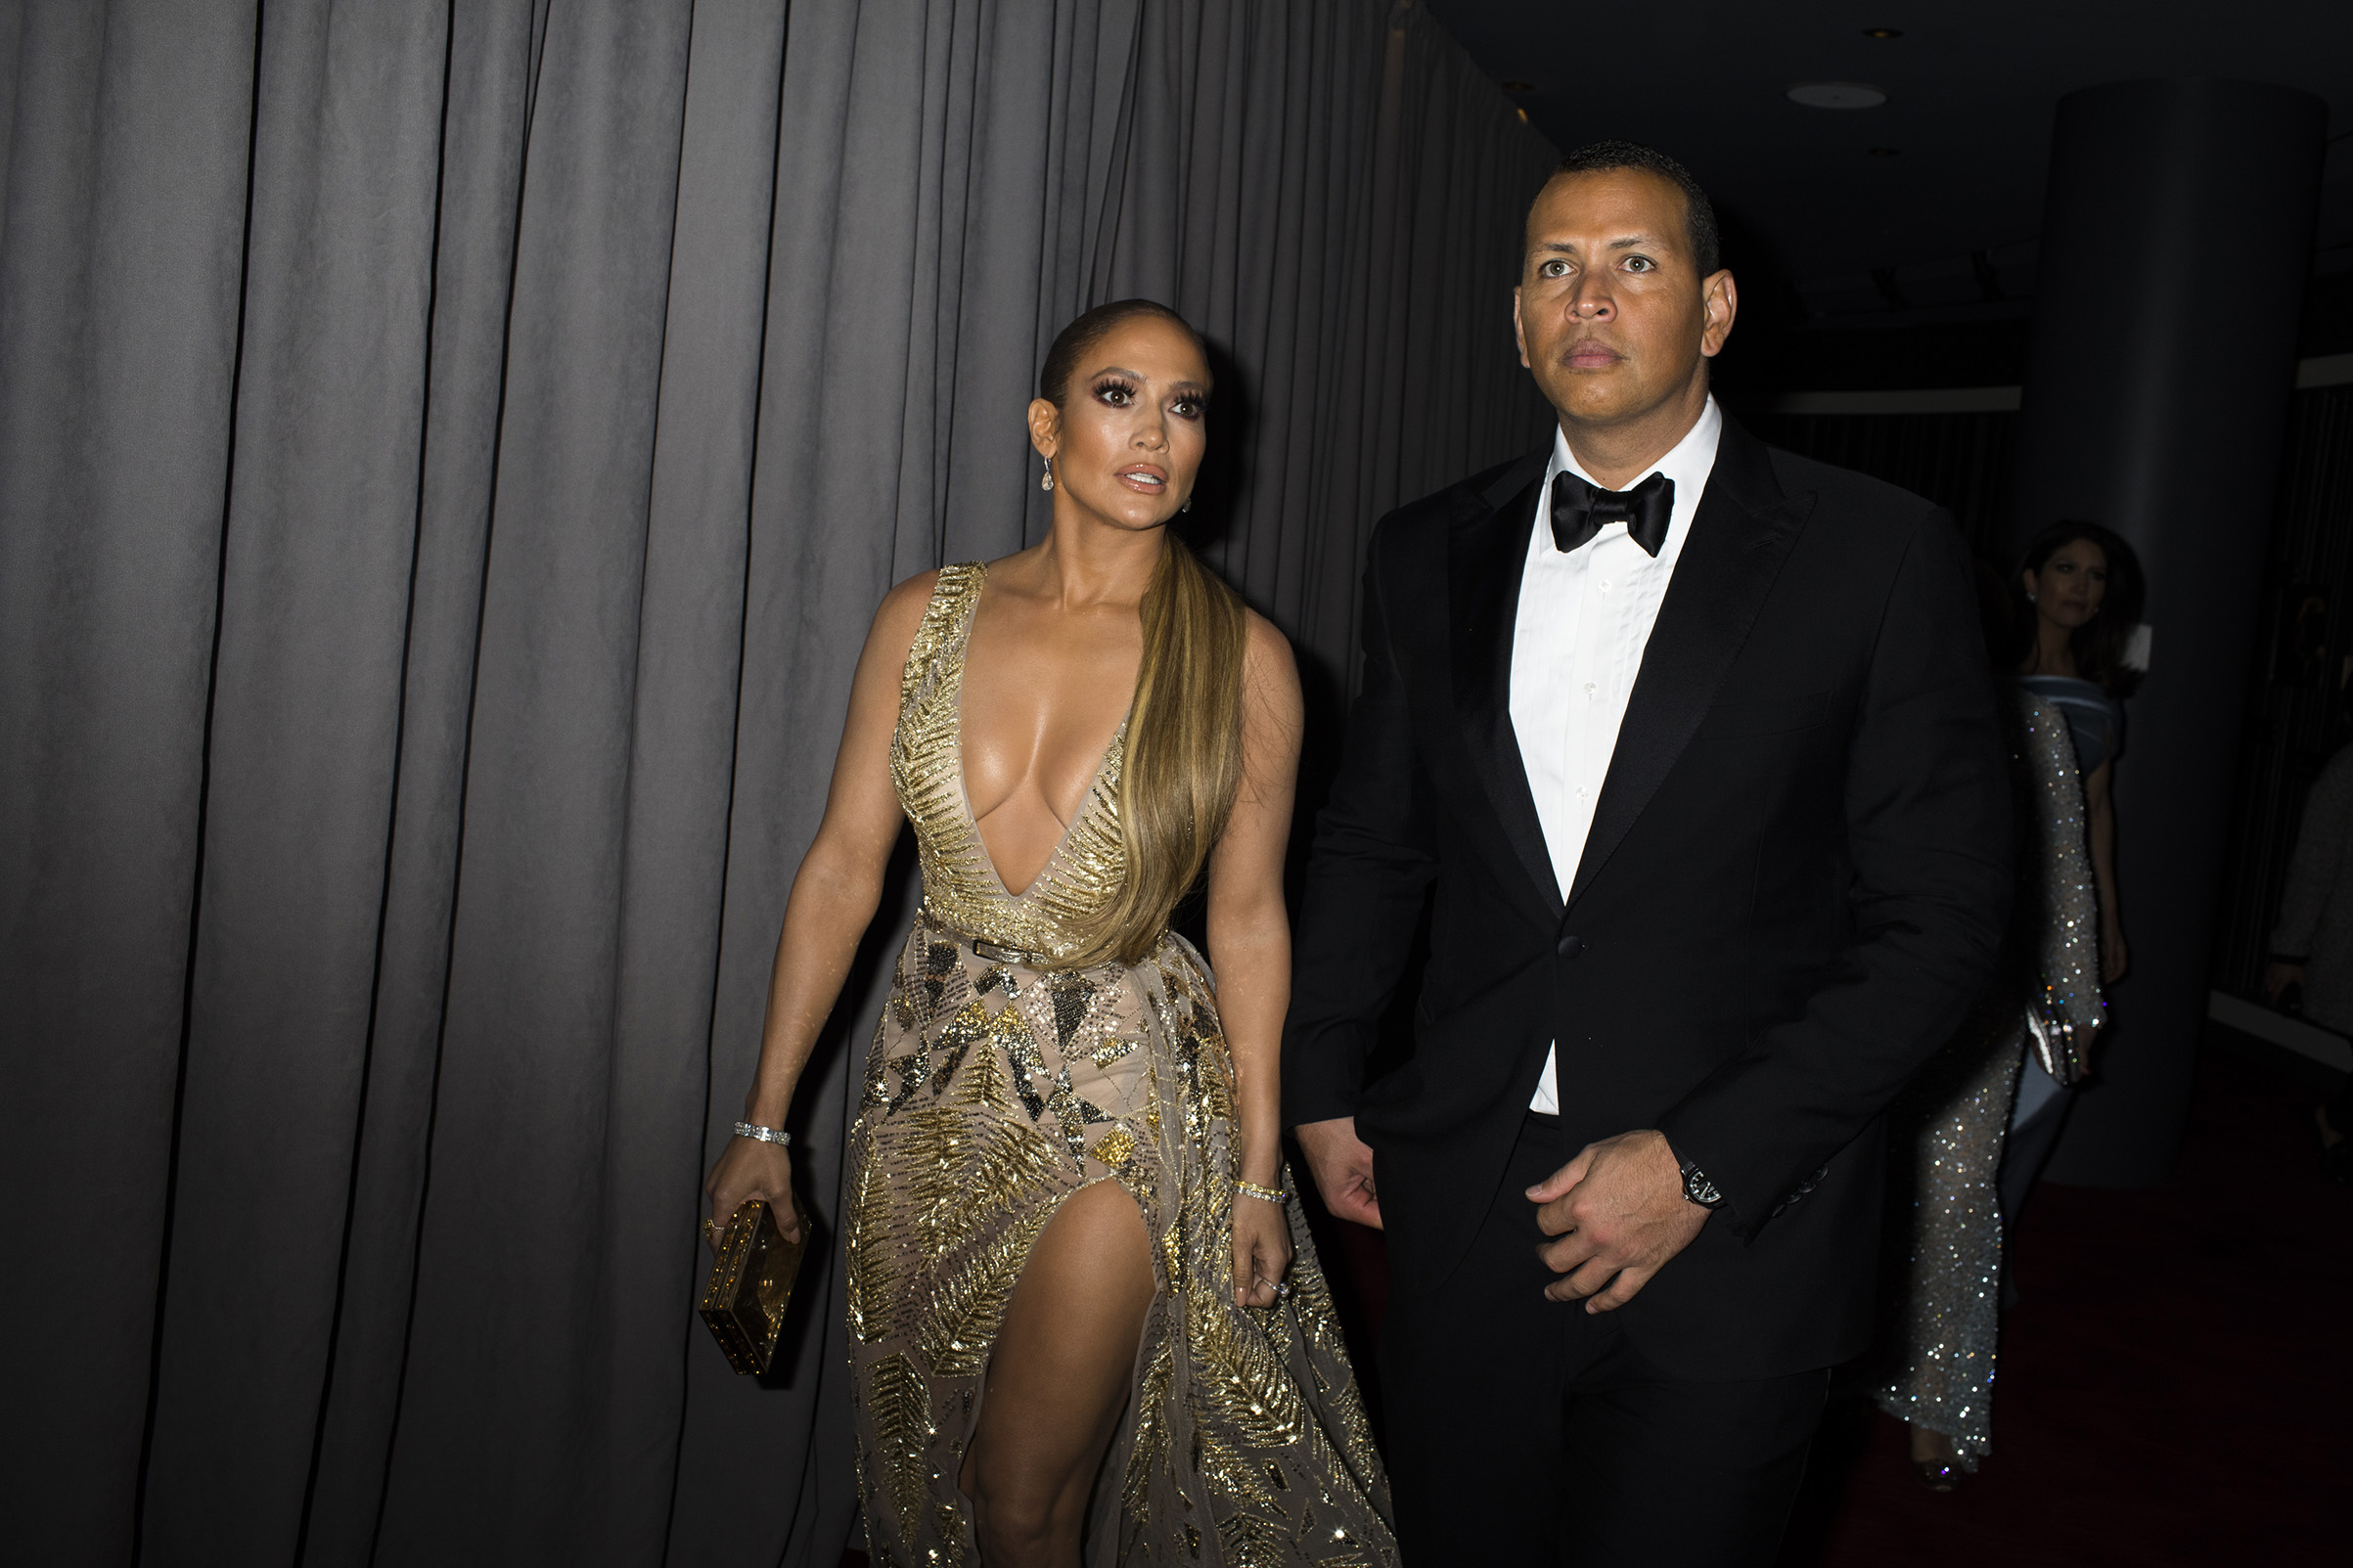 Jennifer Lopez and Alex Rodriguez at the Time 100 Gala at Jazz at Lincoln Center on April 24, 2018 in New York City. (Landon Nordeman for TIME)